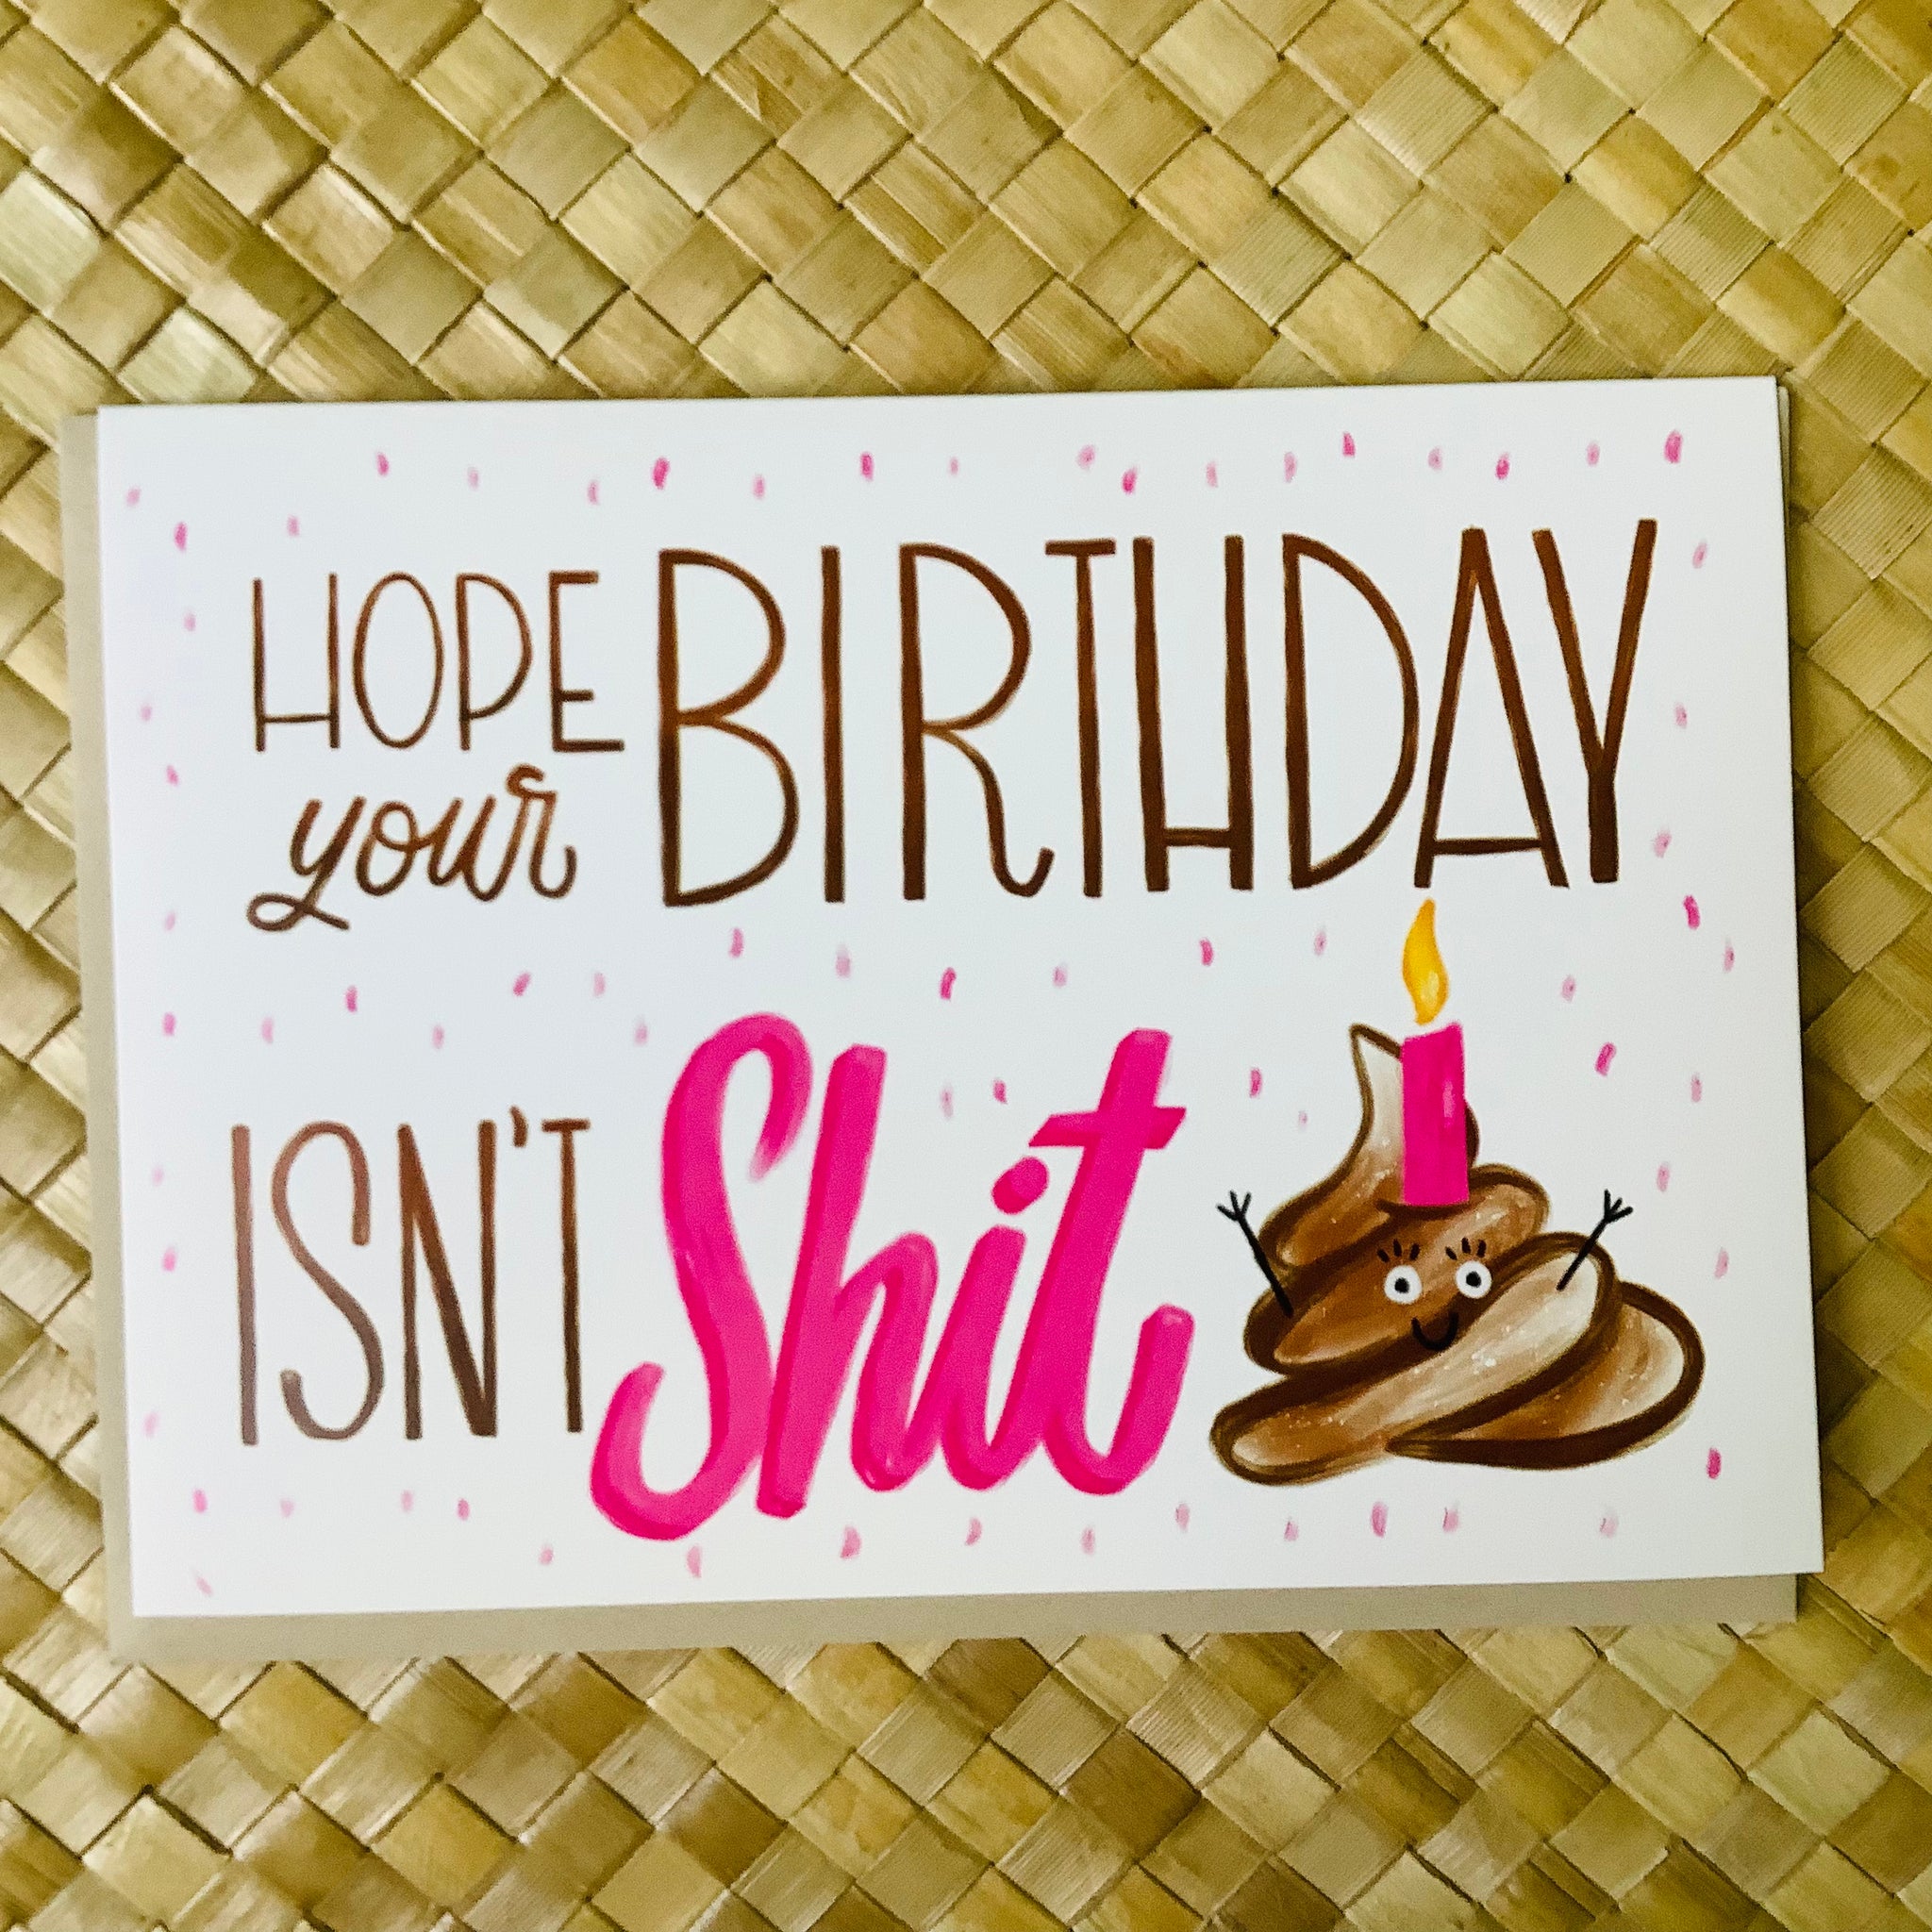 Hope Your Birthday Isn't Shit Card